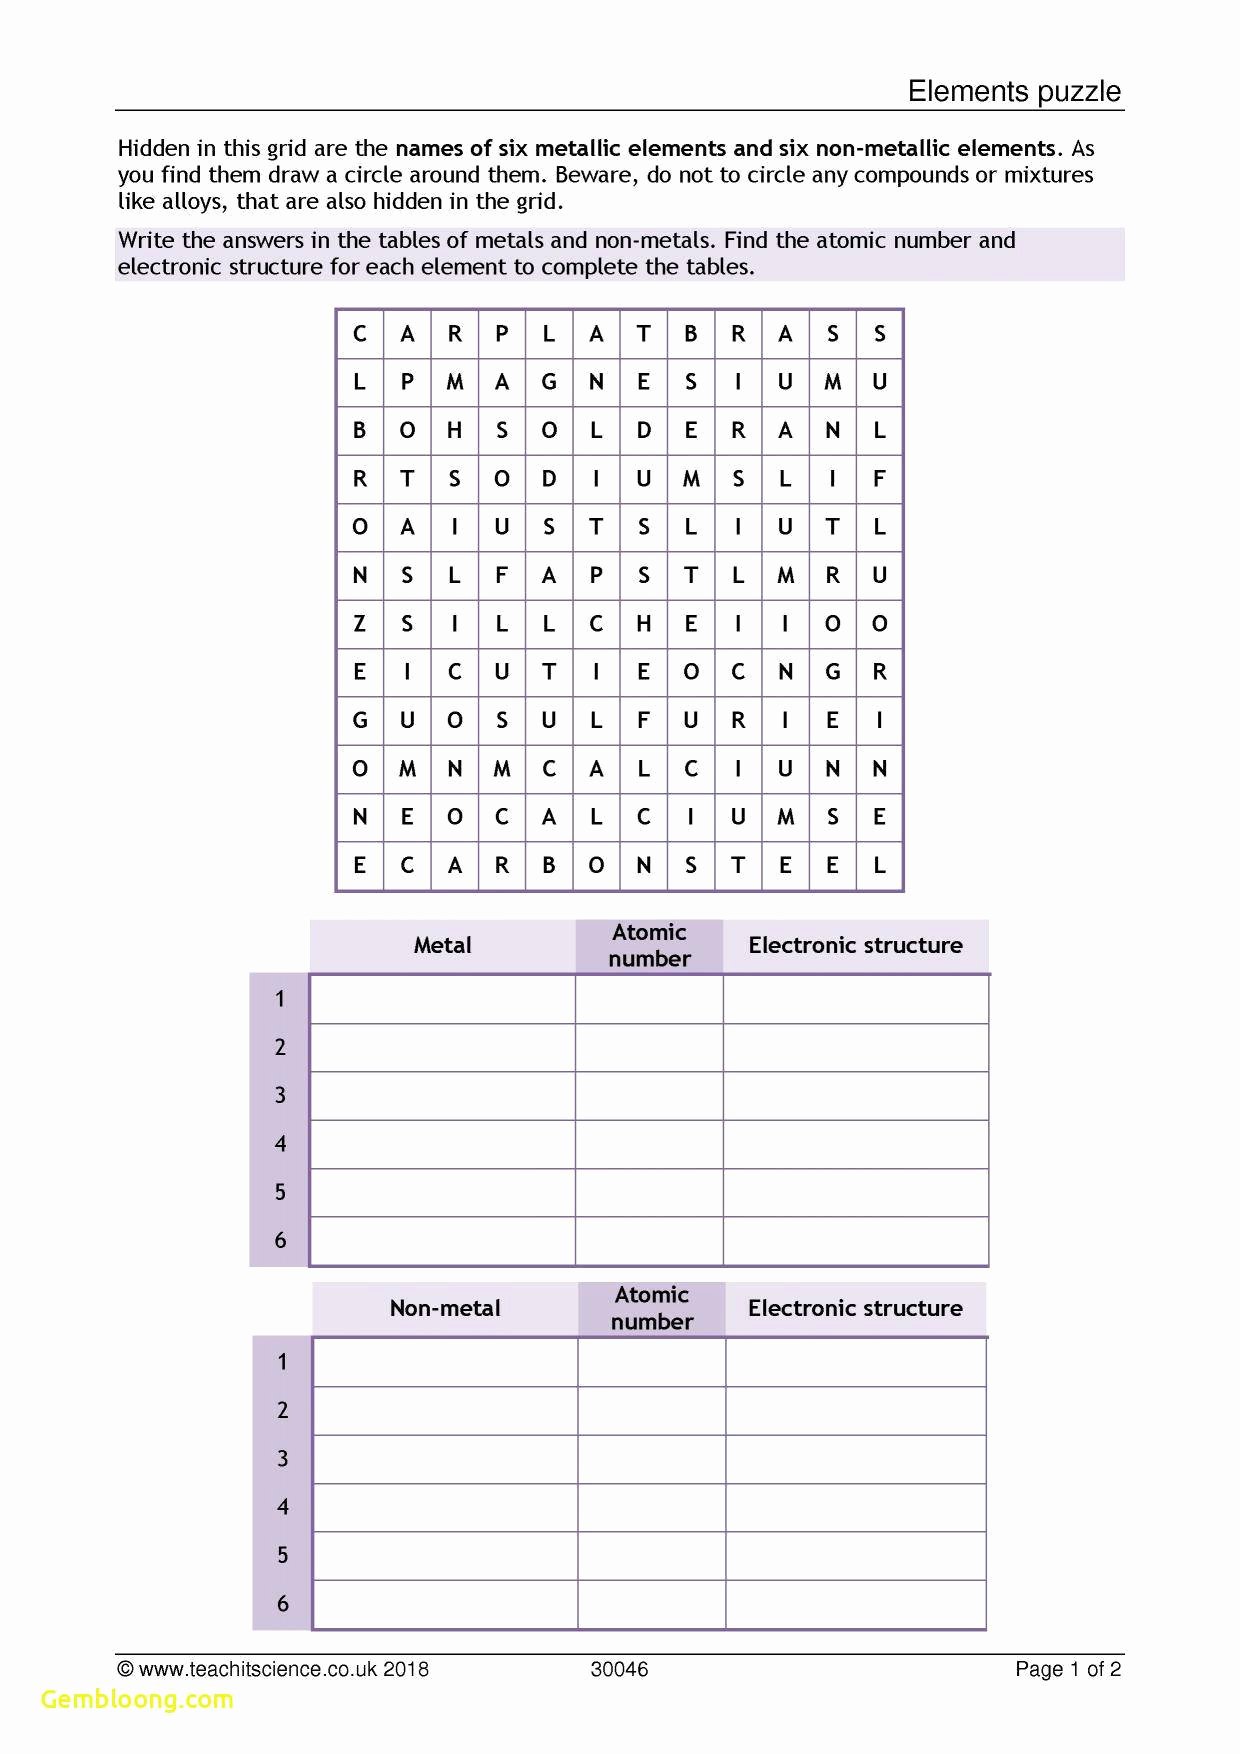 Sequences and Series Worksheet Answers Awesome Sequences and Series Worksheet Answers Cramerforcongress